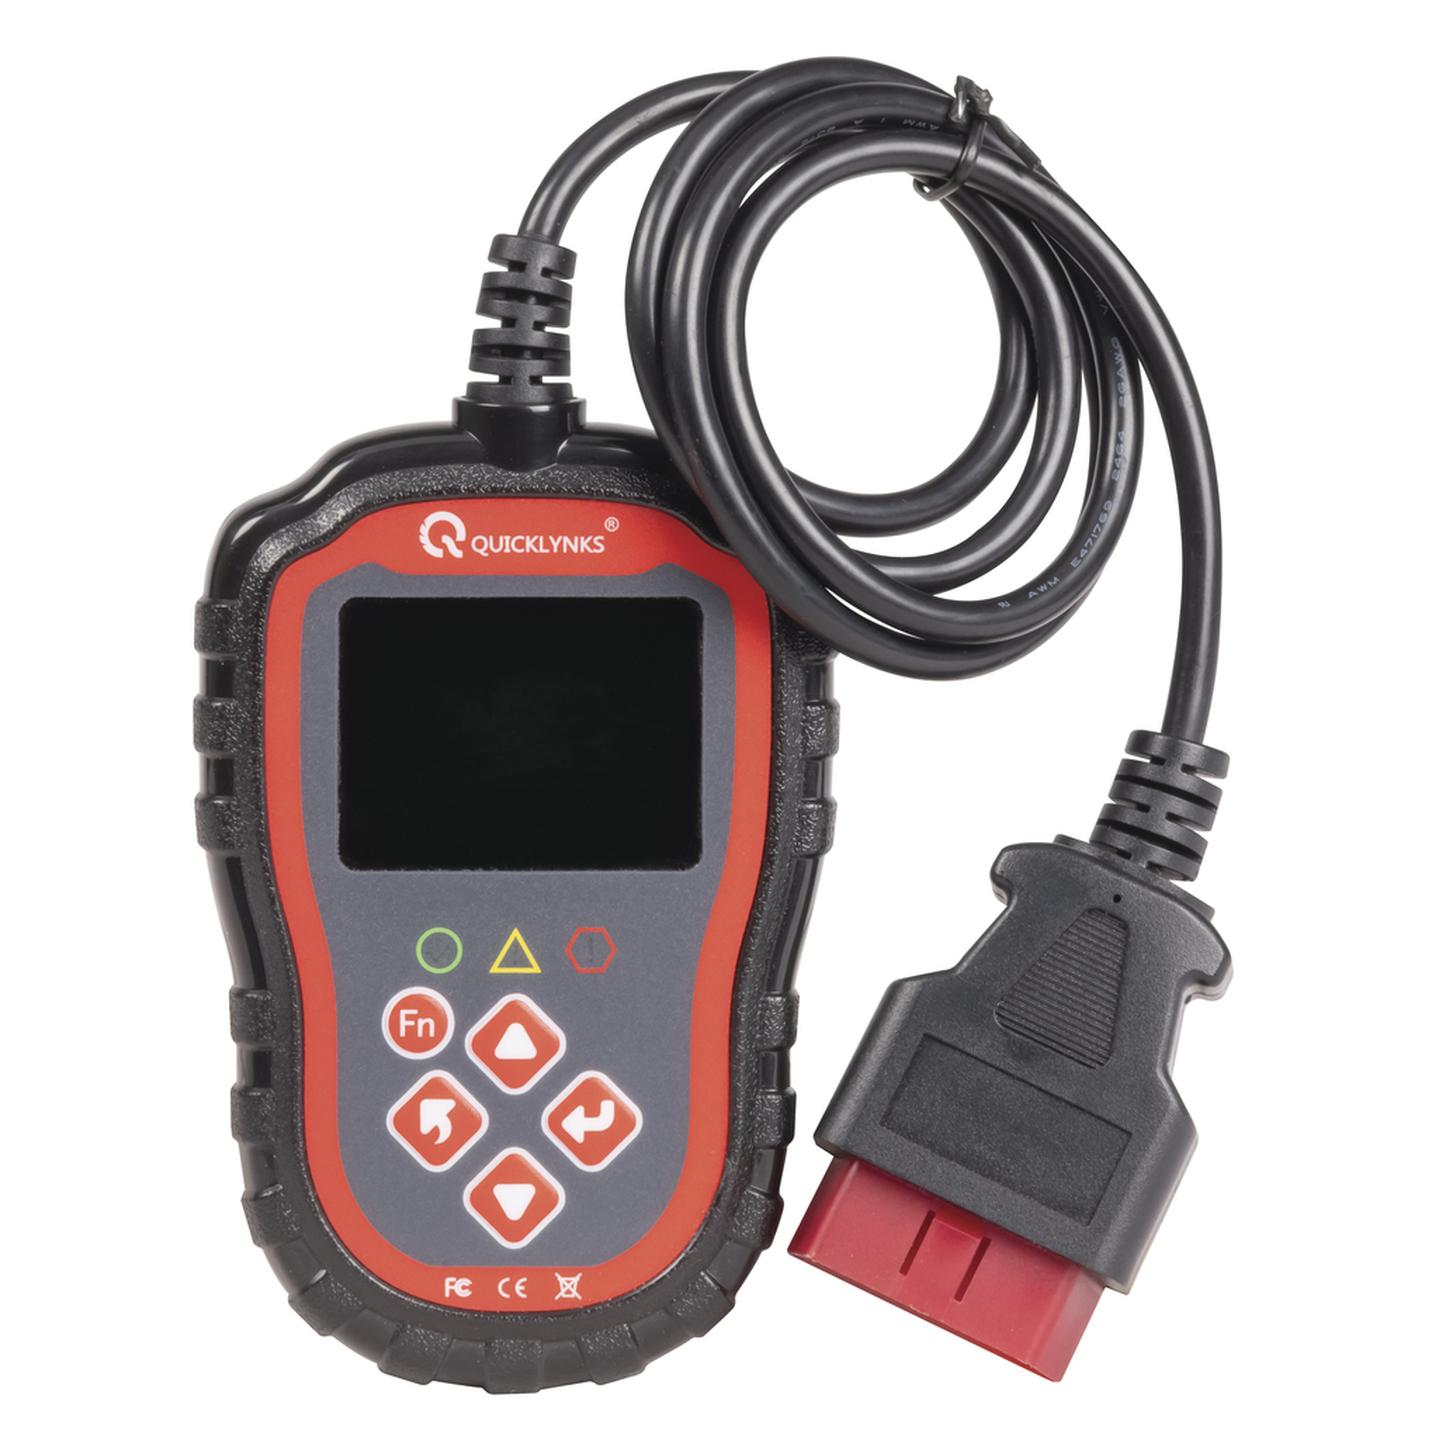 OBD-II Engine Code Reader/Diagnostic Tool with 2.4in LCD